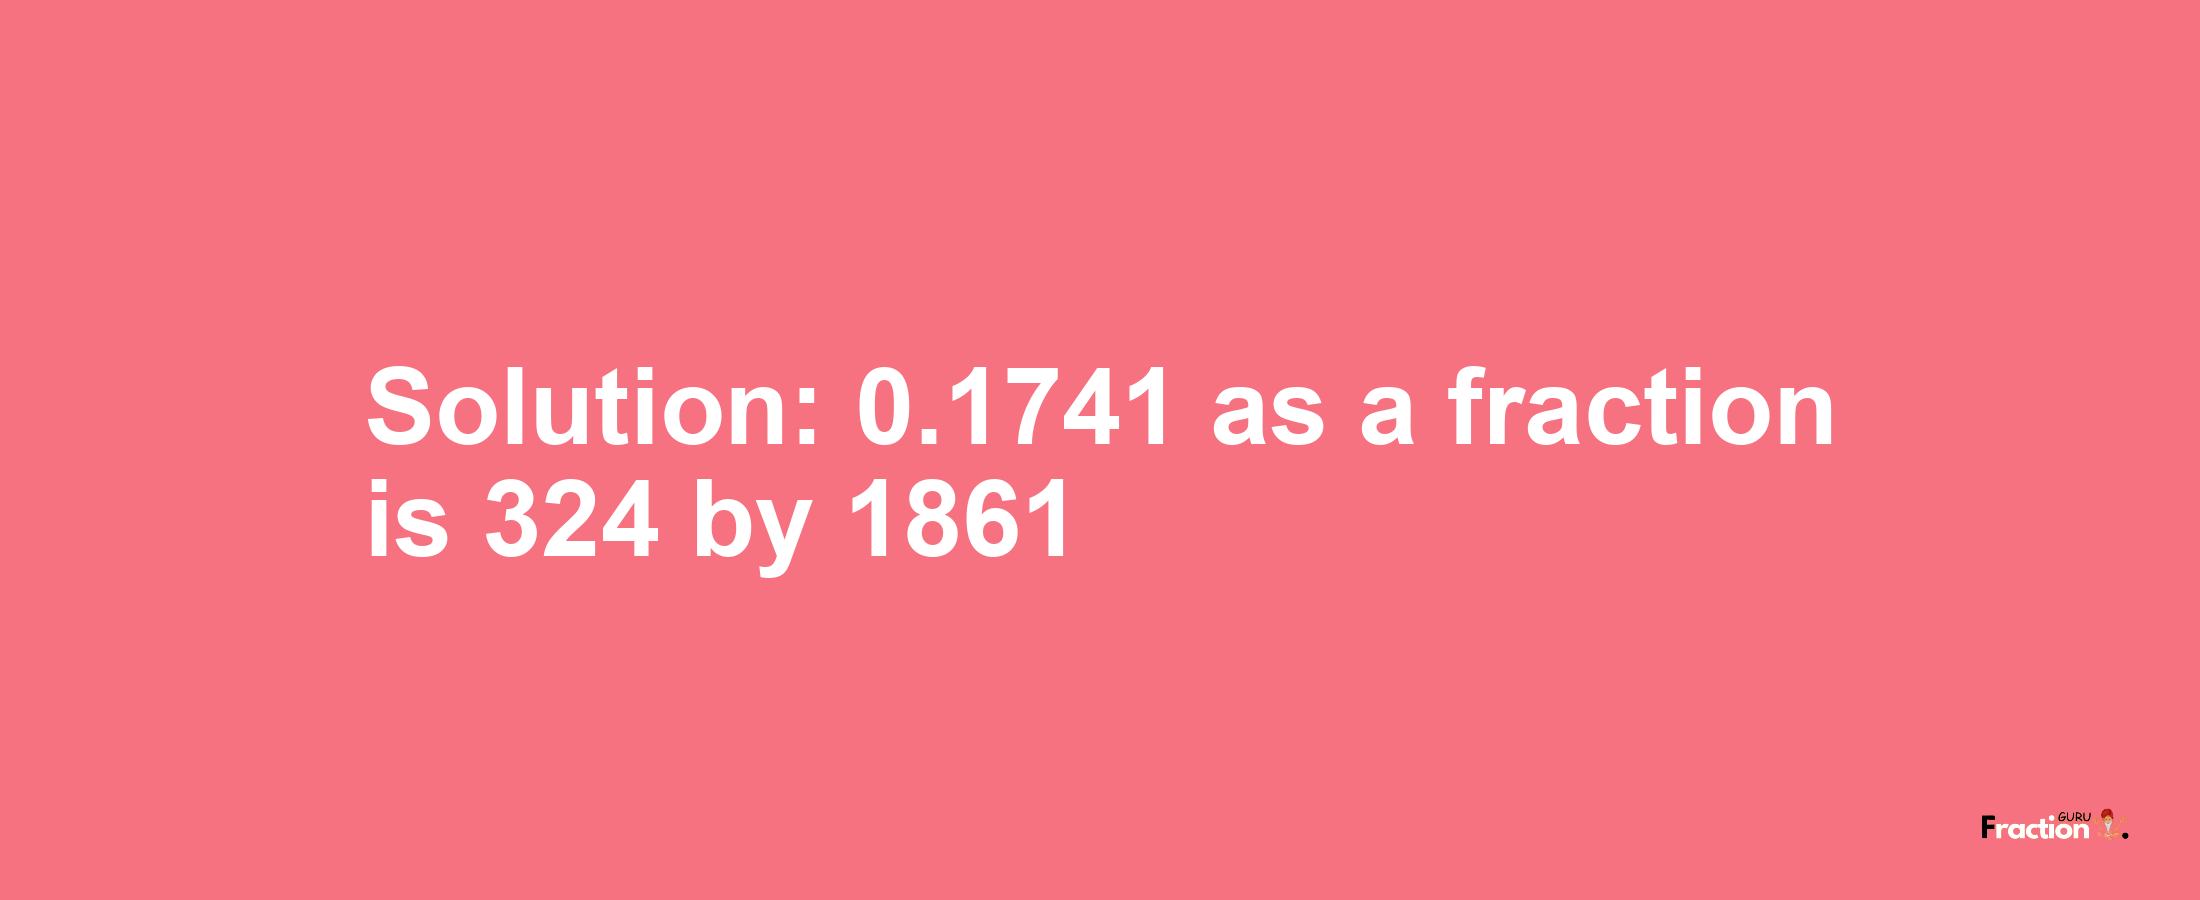 Solution:0.1741 as a fraction is 324/1861